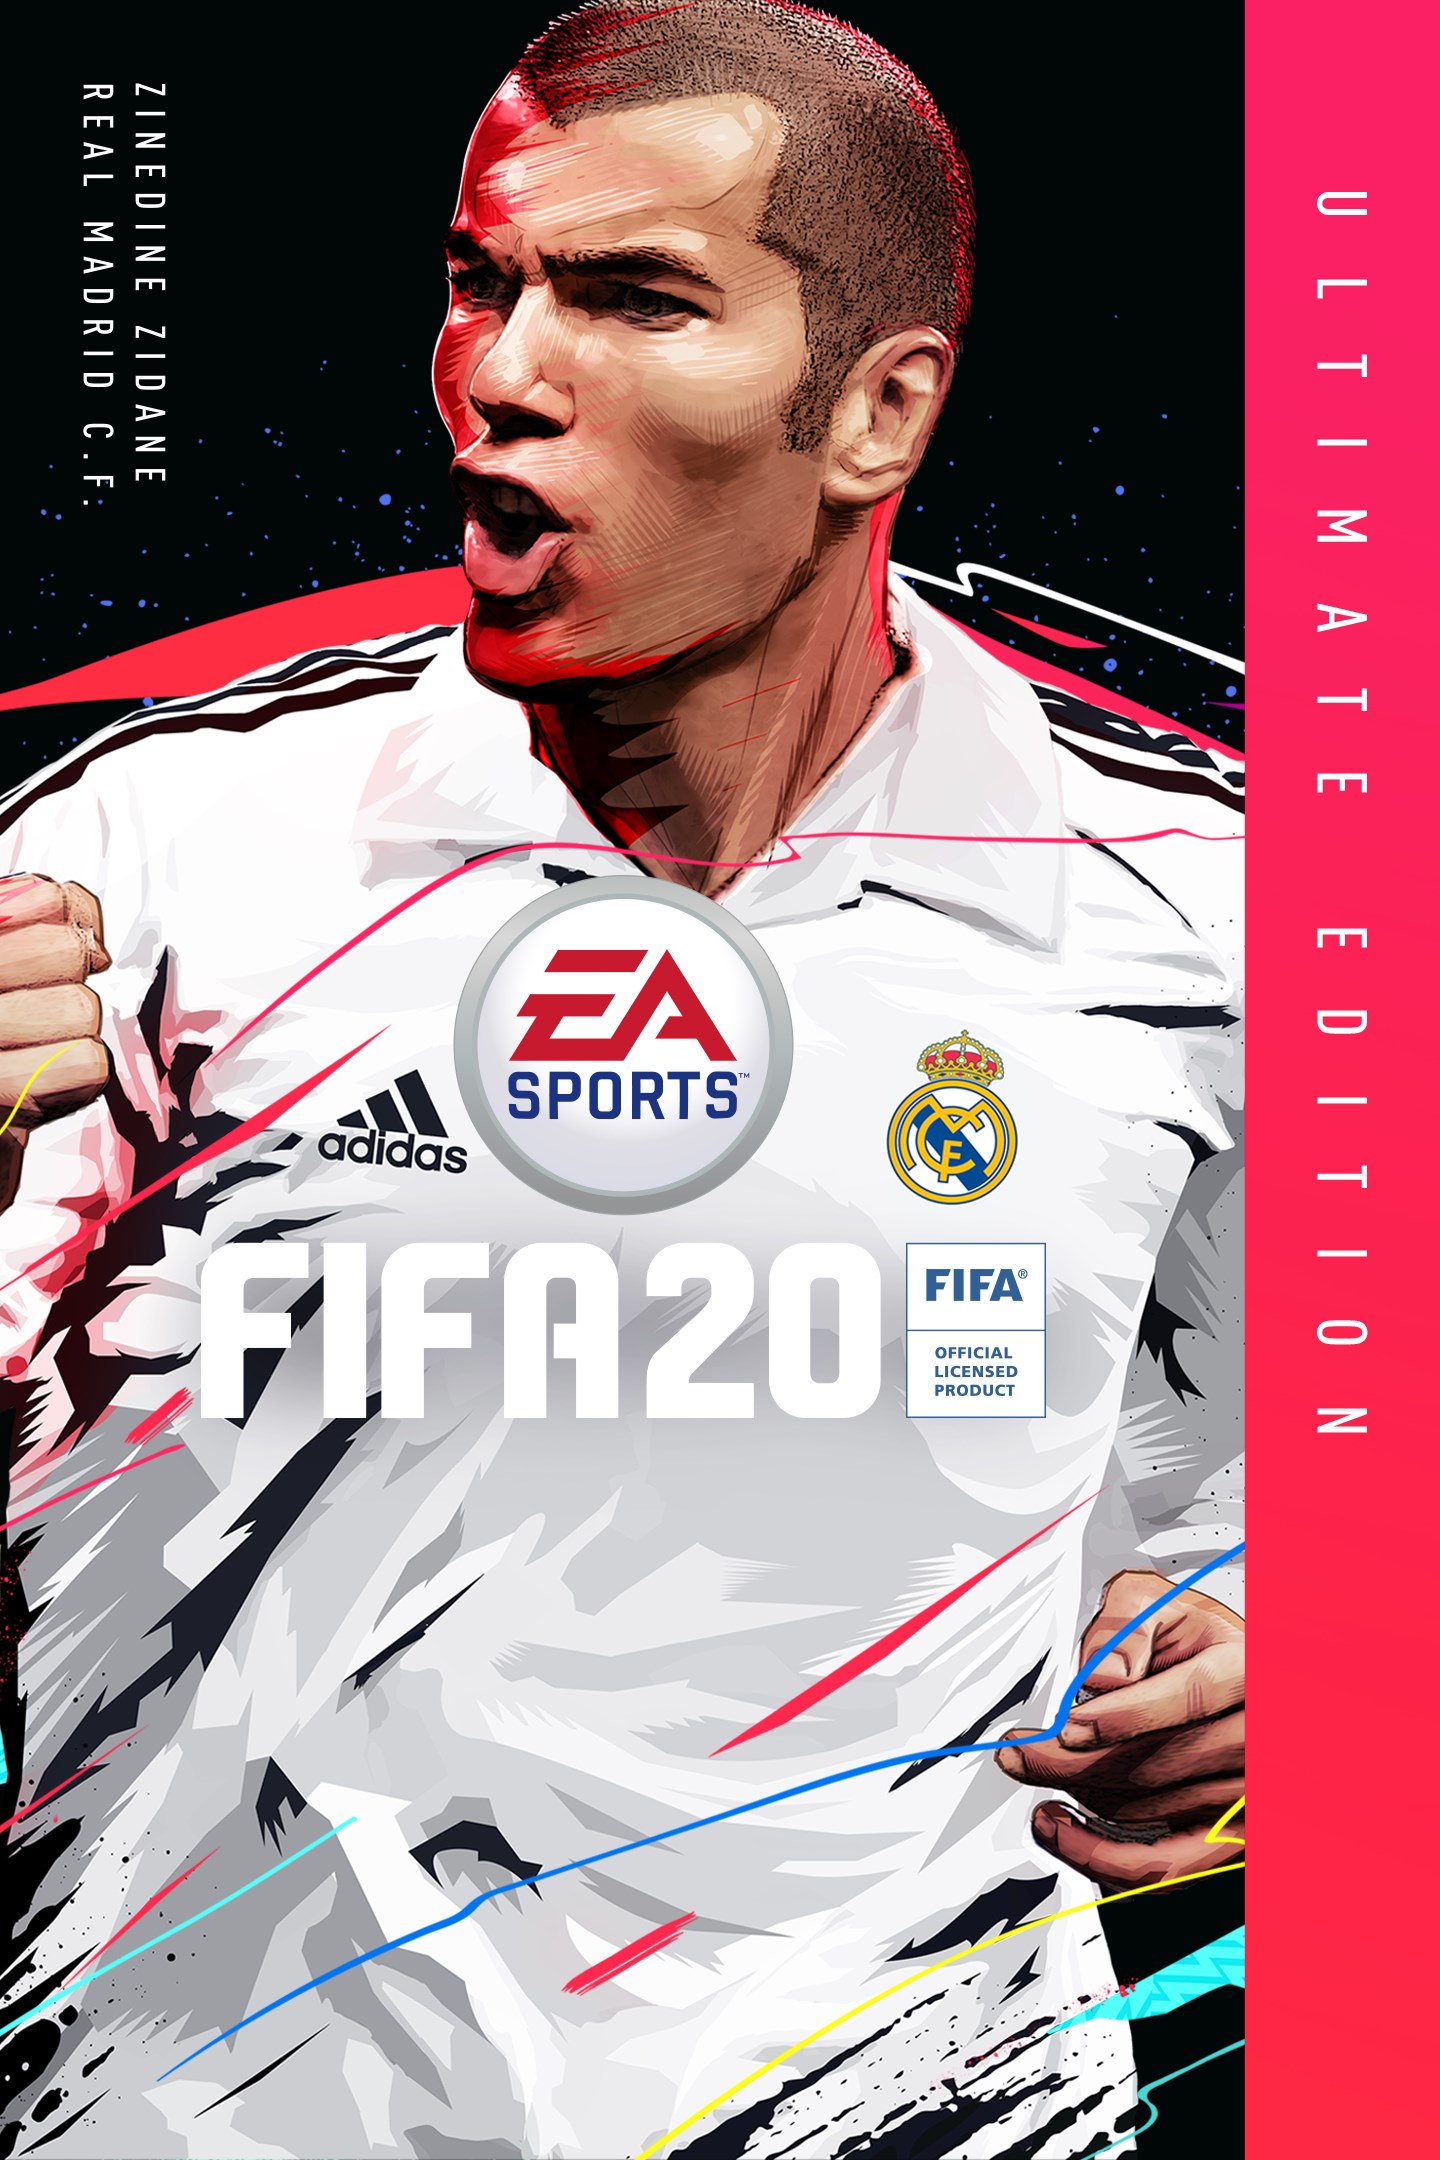 fifa 20 on xbox one s